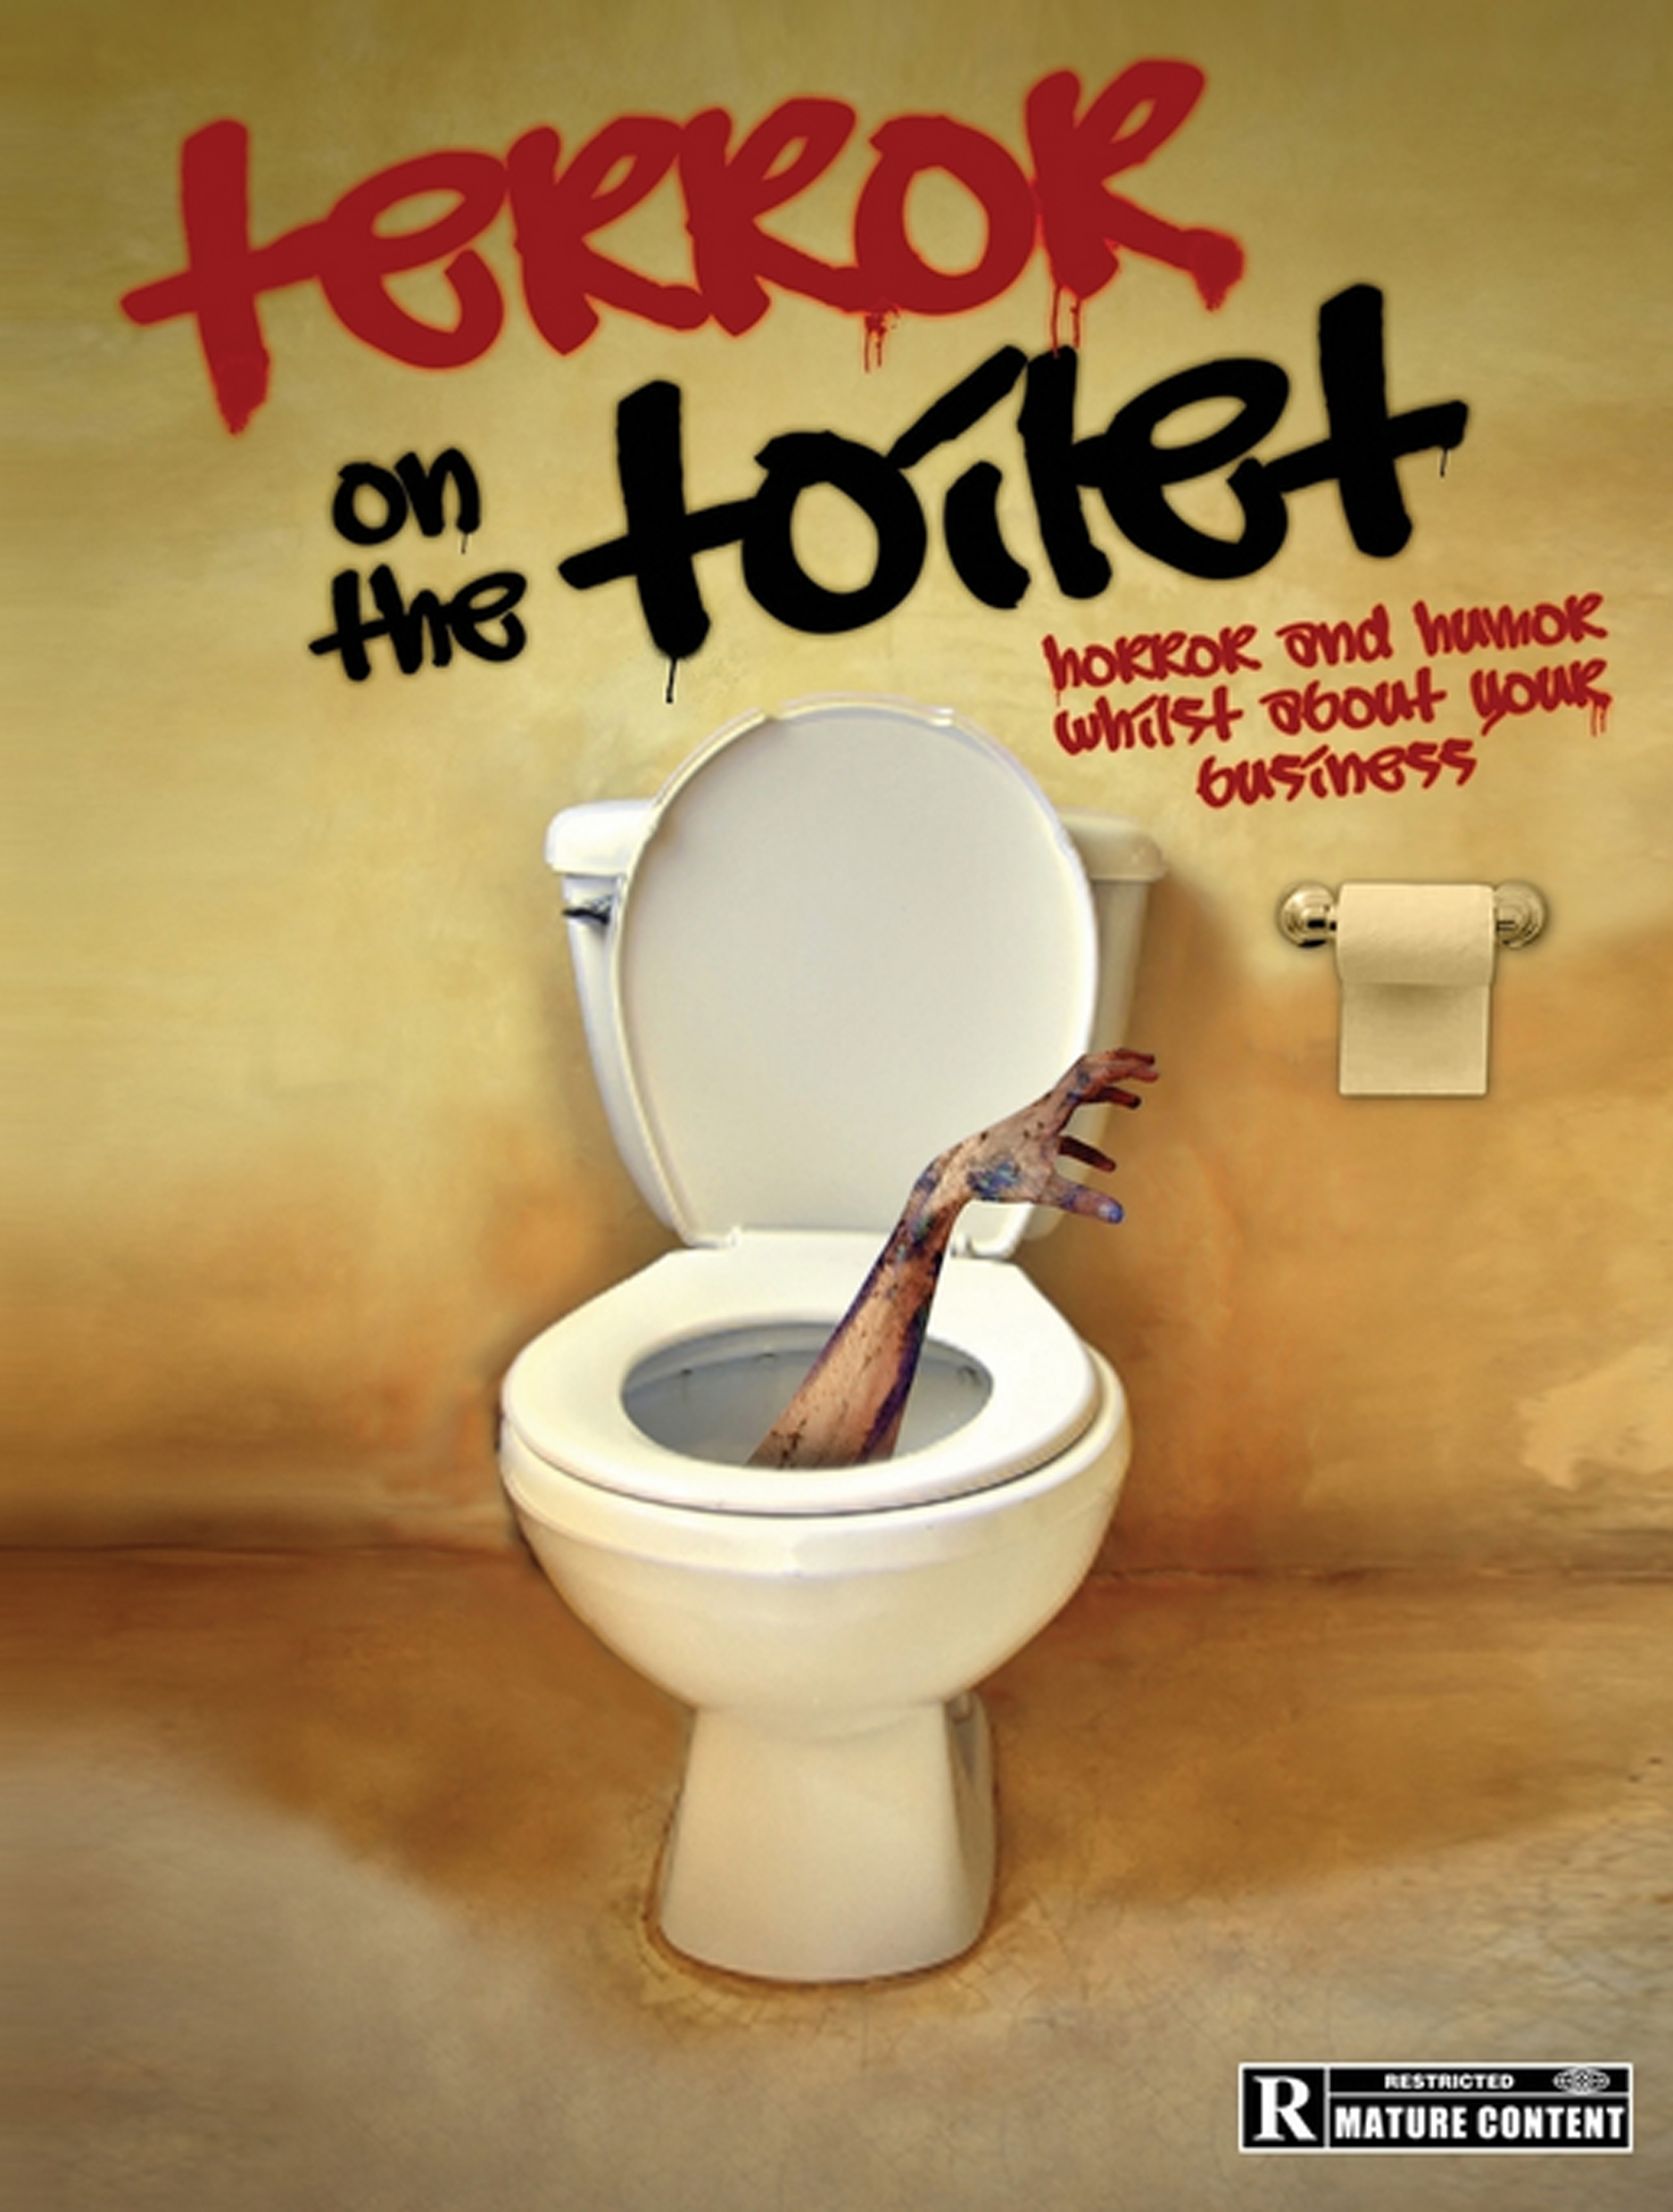 Terror on the Toilet cover